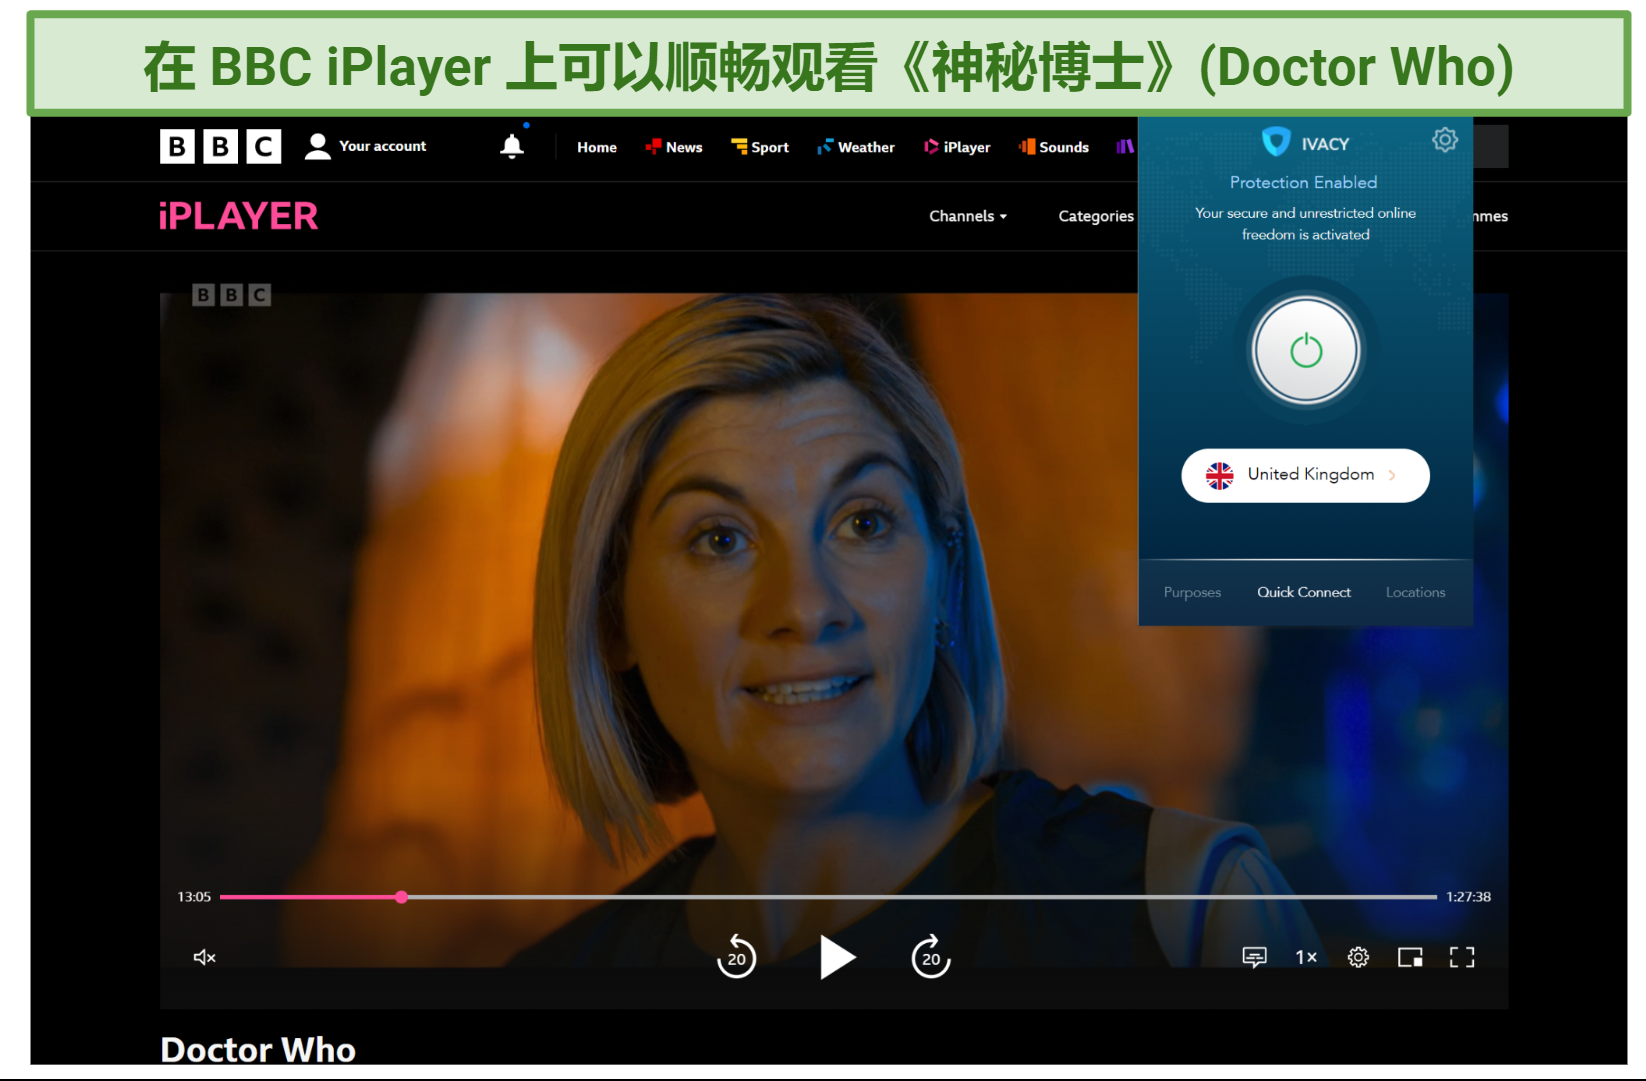 Screenshot of BBC iPlayer streaming Doctor Who while connected to Ivacy VPN